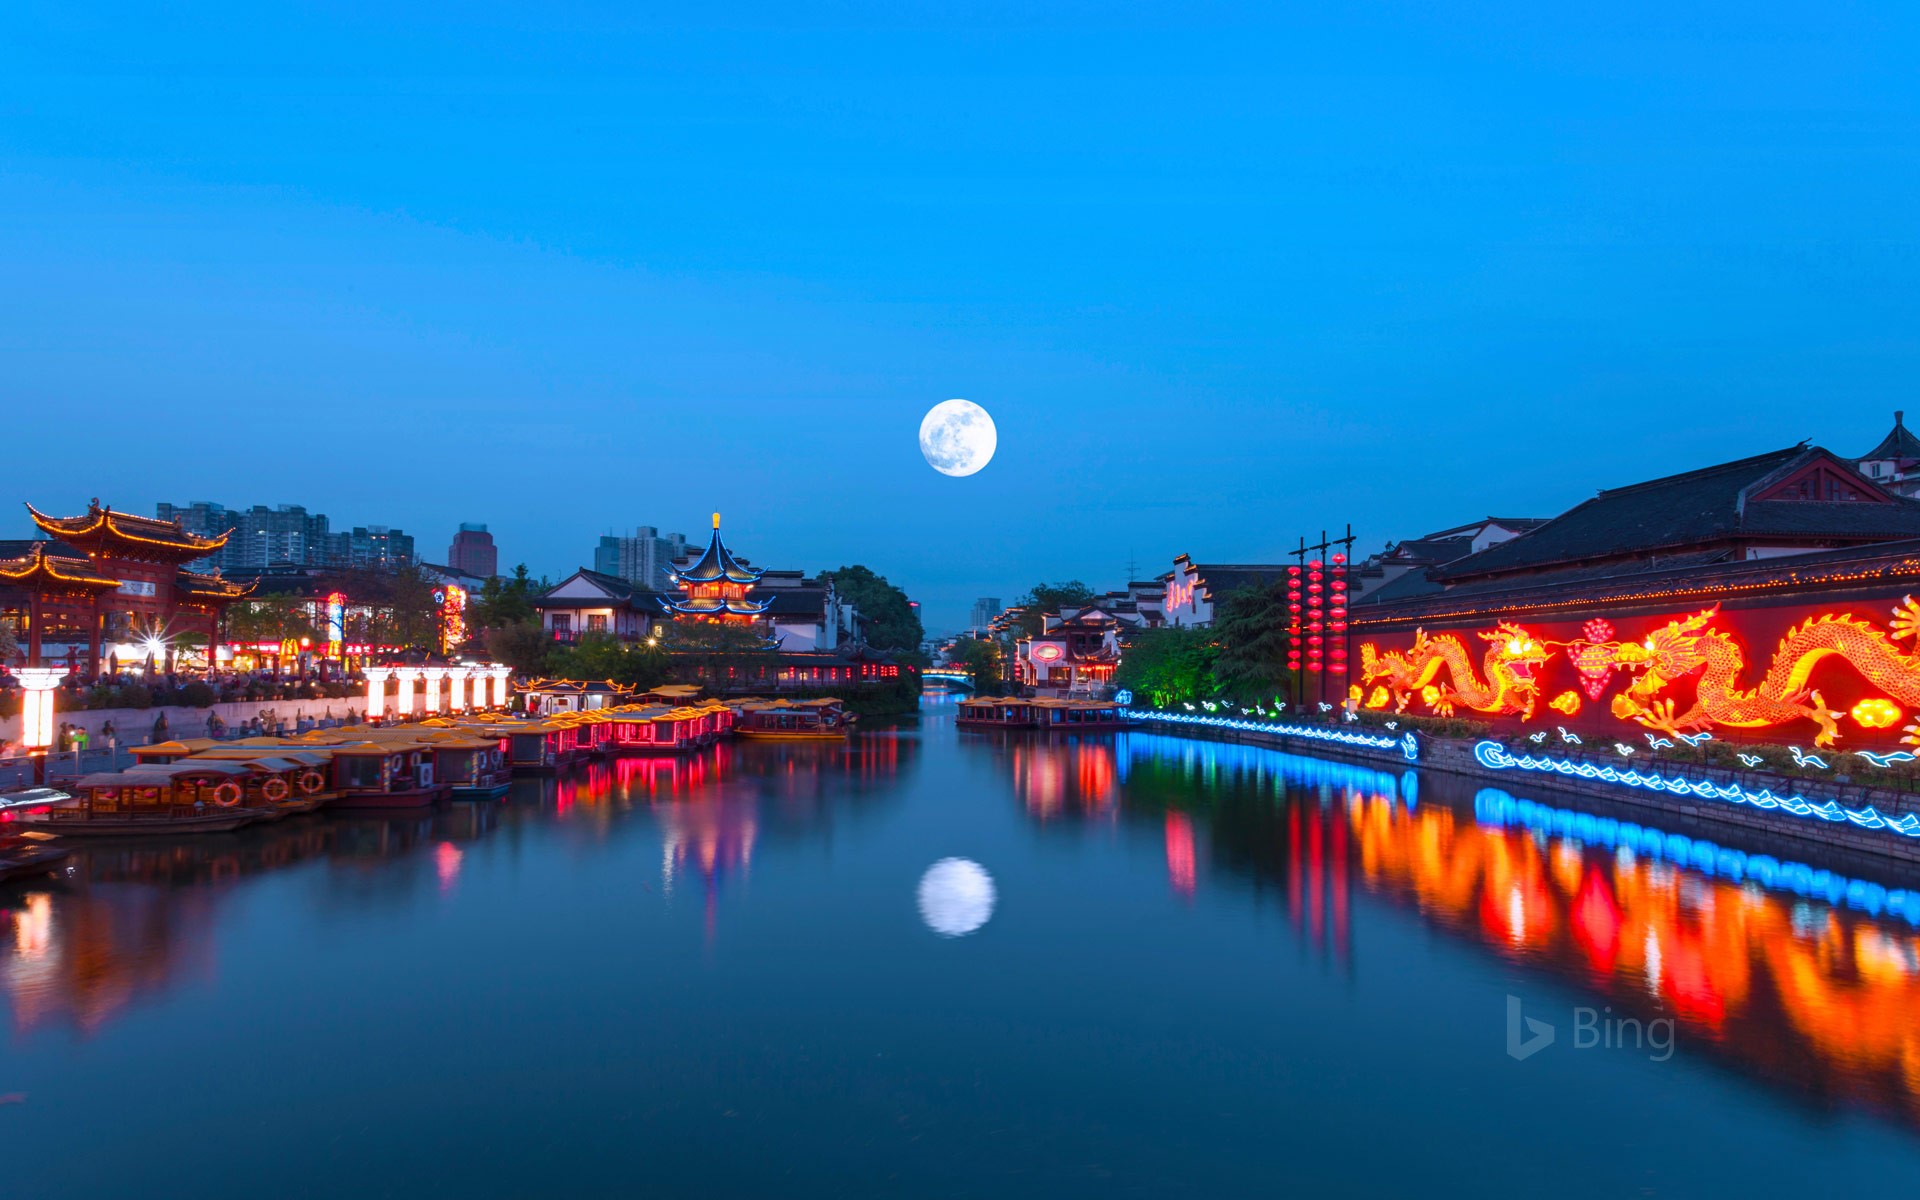 The Qinhuai River in Nanjing, China, during the Mid-Autumn Festival